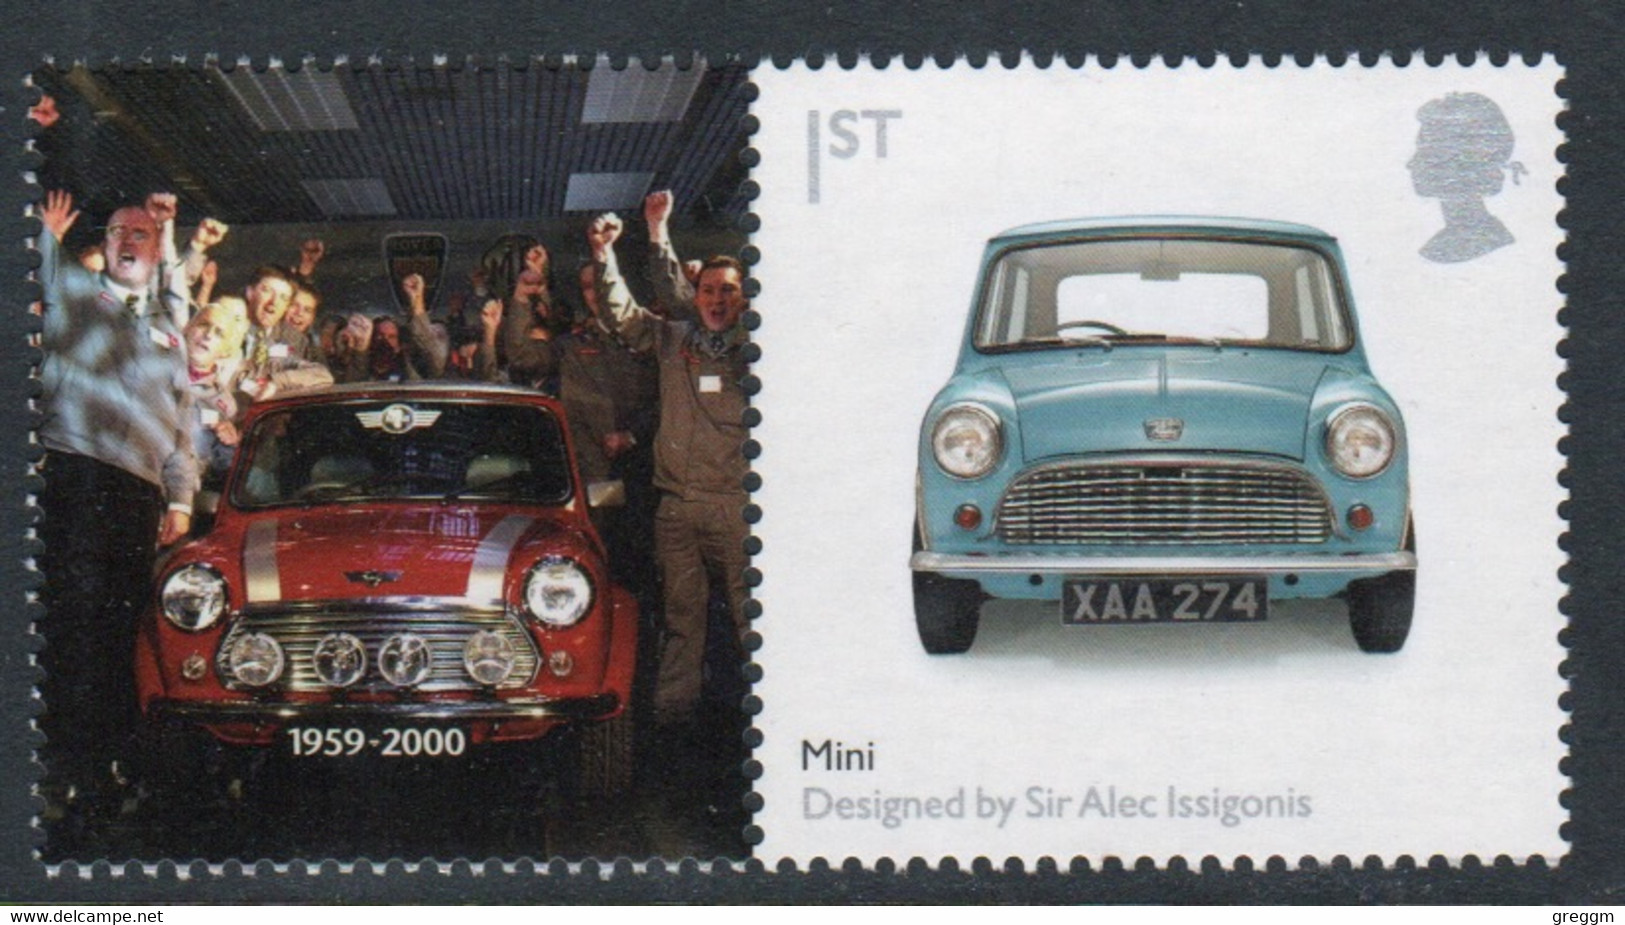 Great Britain 2009 Single 1st Smiler Sheet Commemorative Stamp With Labels From The Design Set In Unmounted Mint. - Francobolli Personalizzati